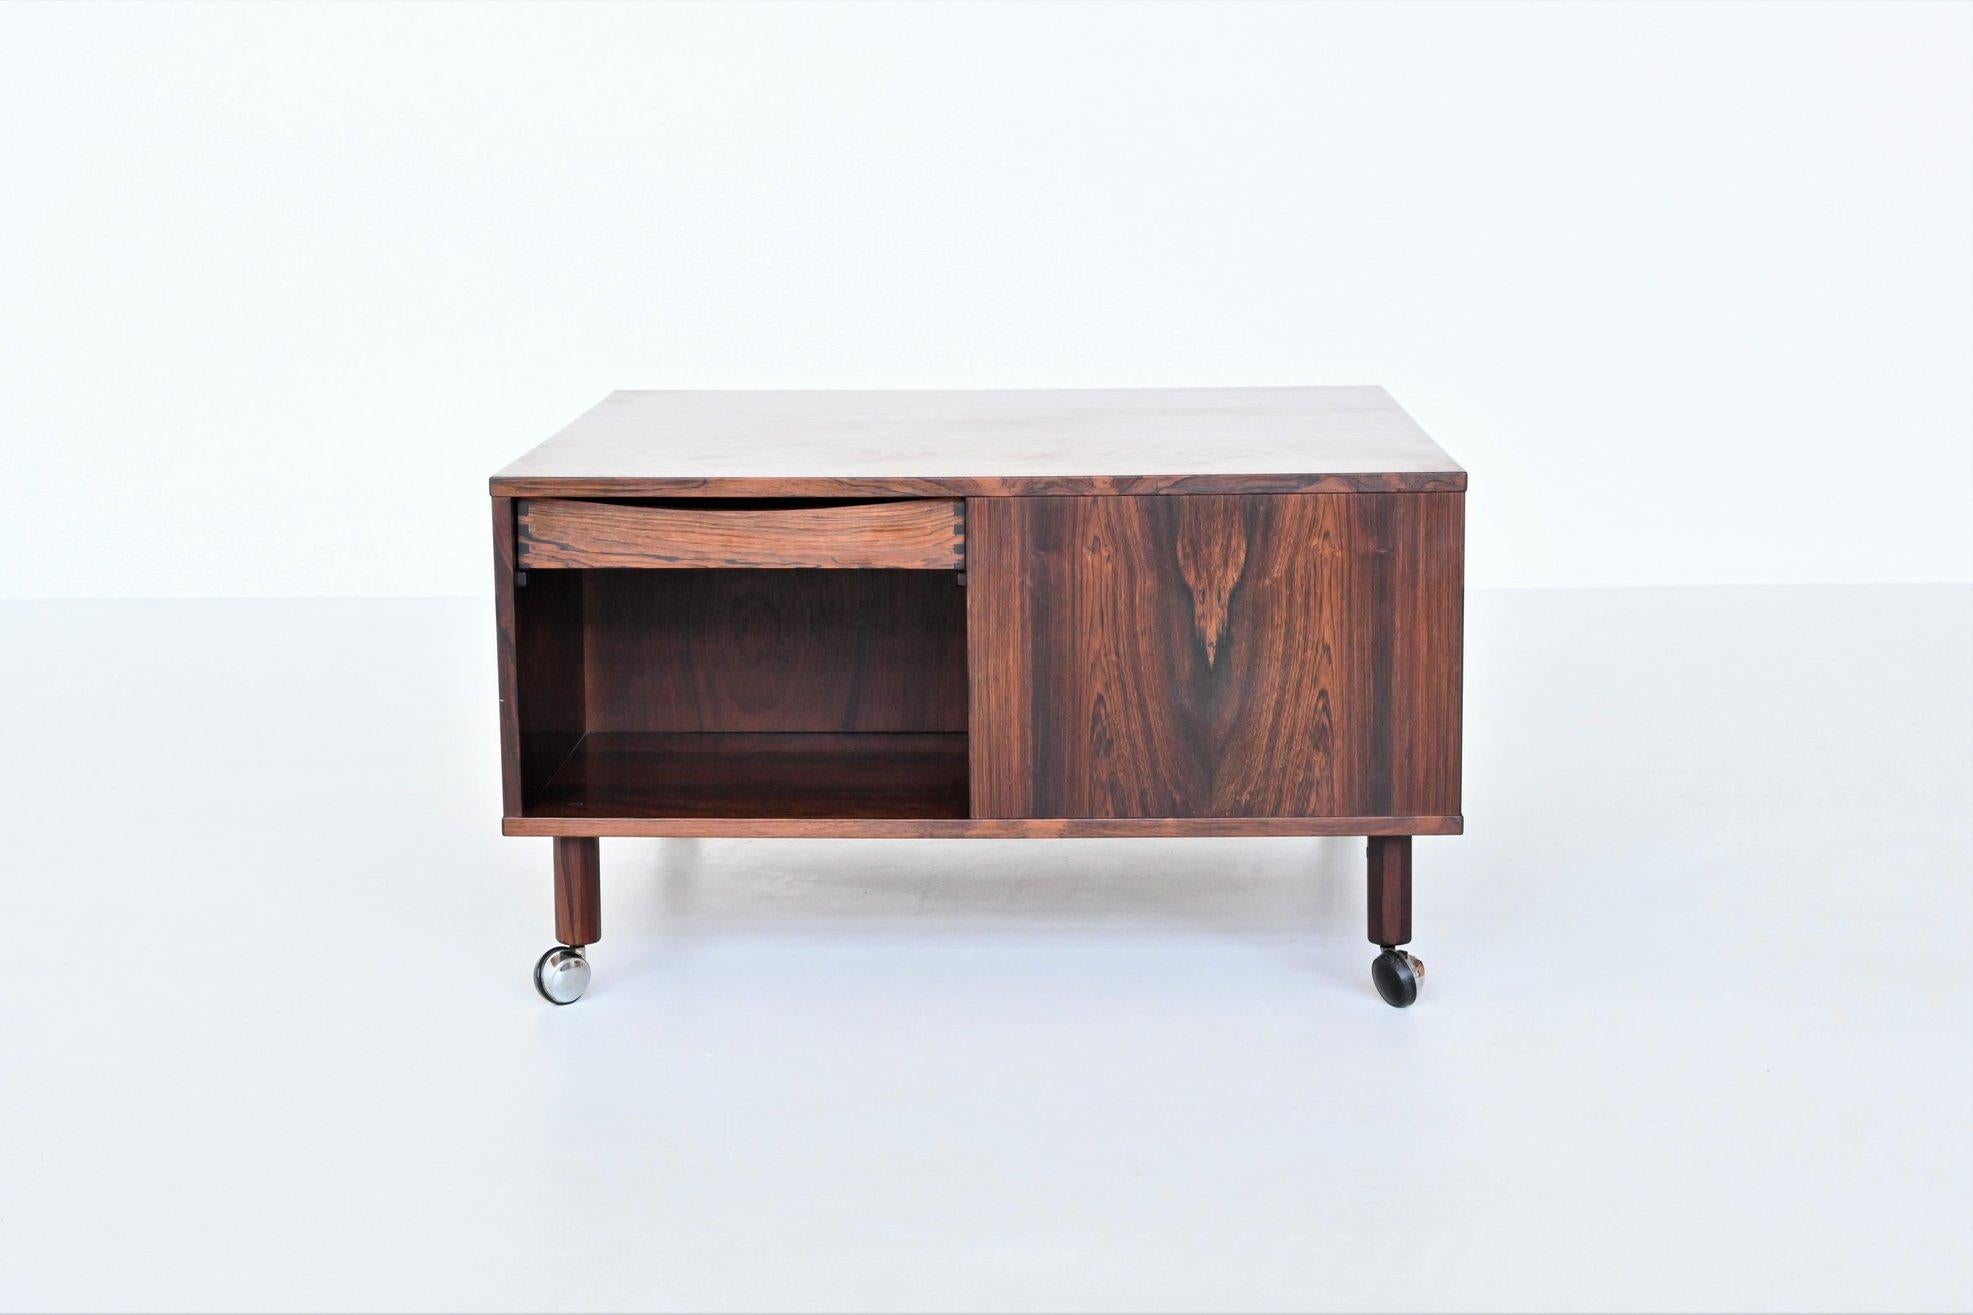 Beautiful and very unique “Cubus” coffee table designed by Peter Lovig Nielsen, Denmark 1960. This square shaped coffee table is executed in nicely grained rosewood that has rich fiery tones of black and red. It could easily be used as a media unit